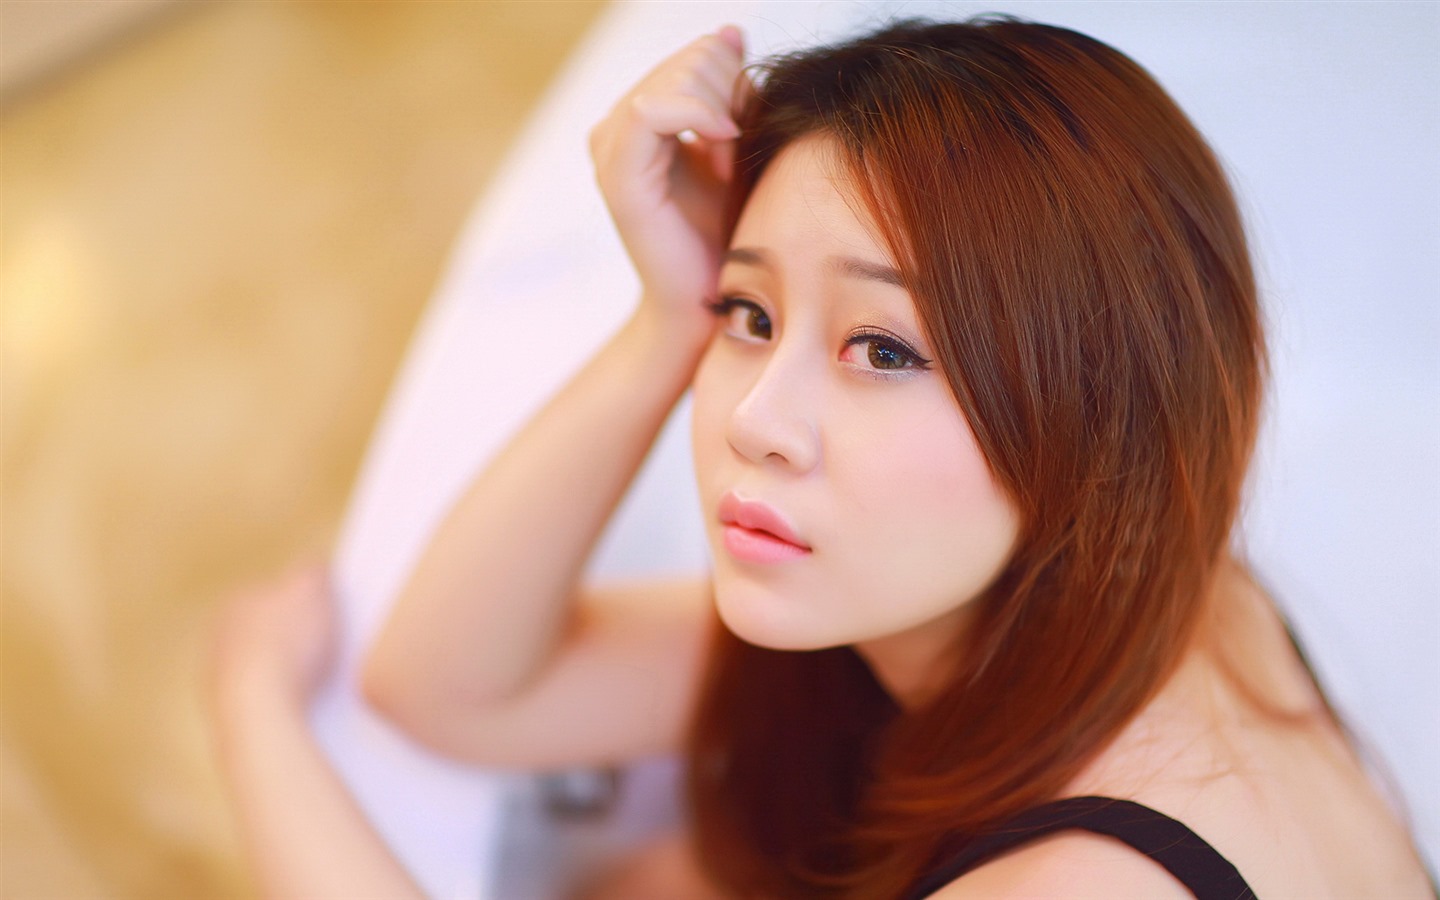 Pure and lovely young Asian girl HD wallpapers collection (1) #34 - 1440x900